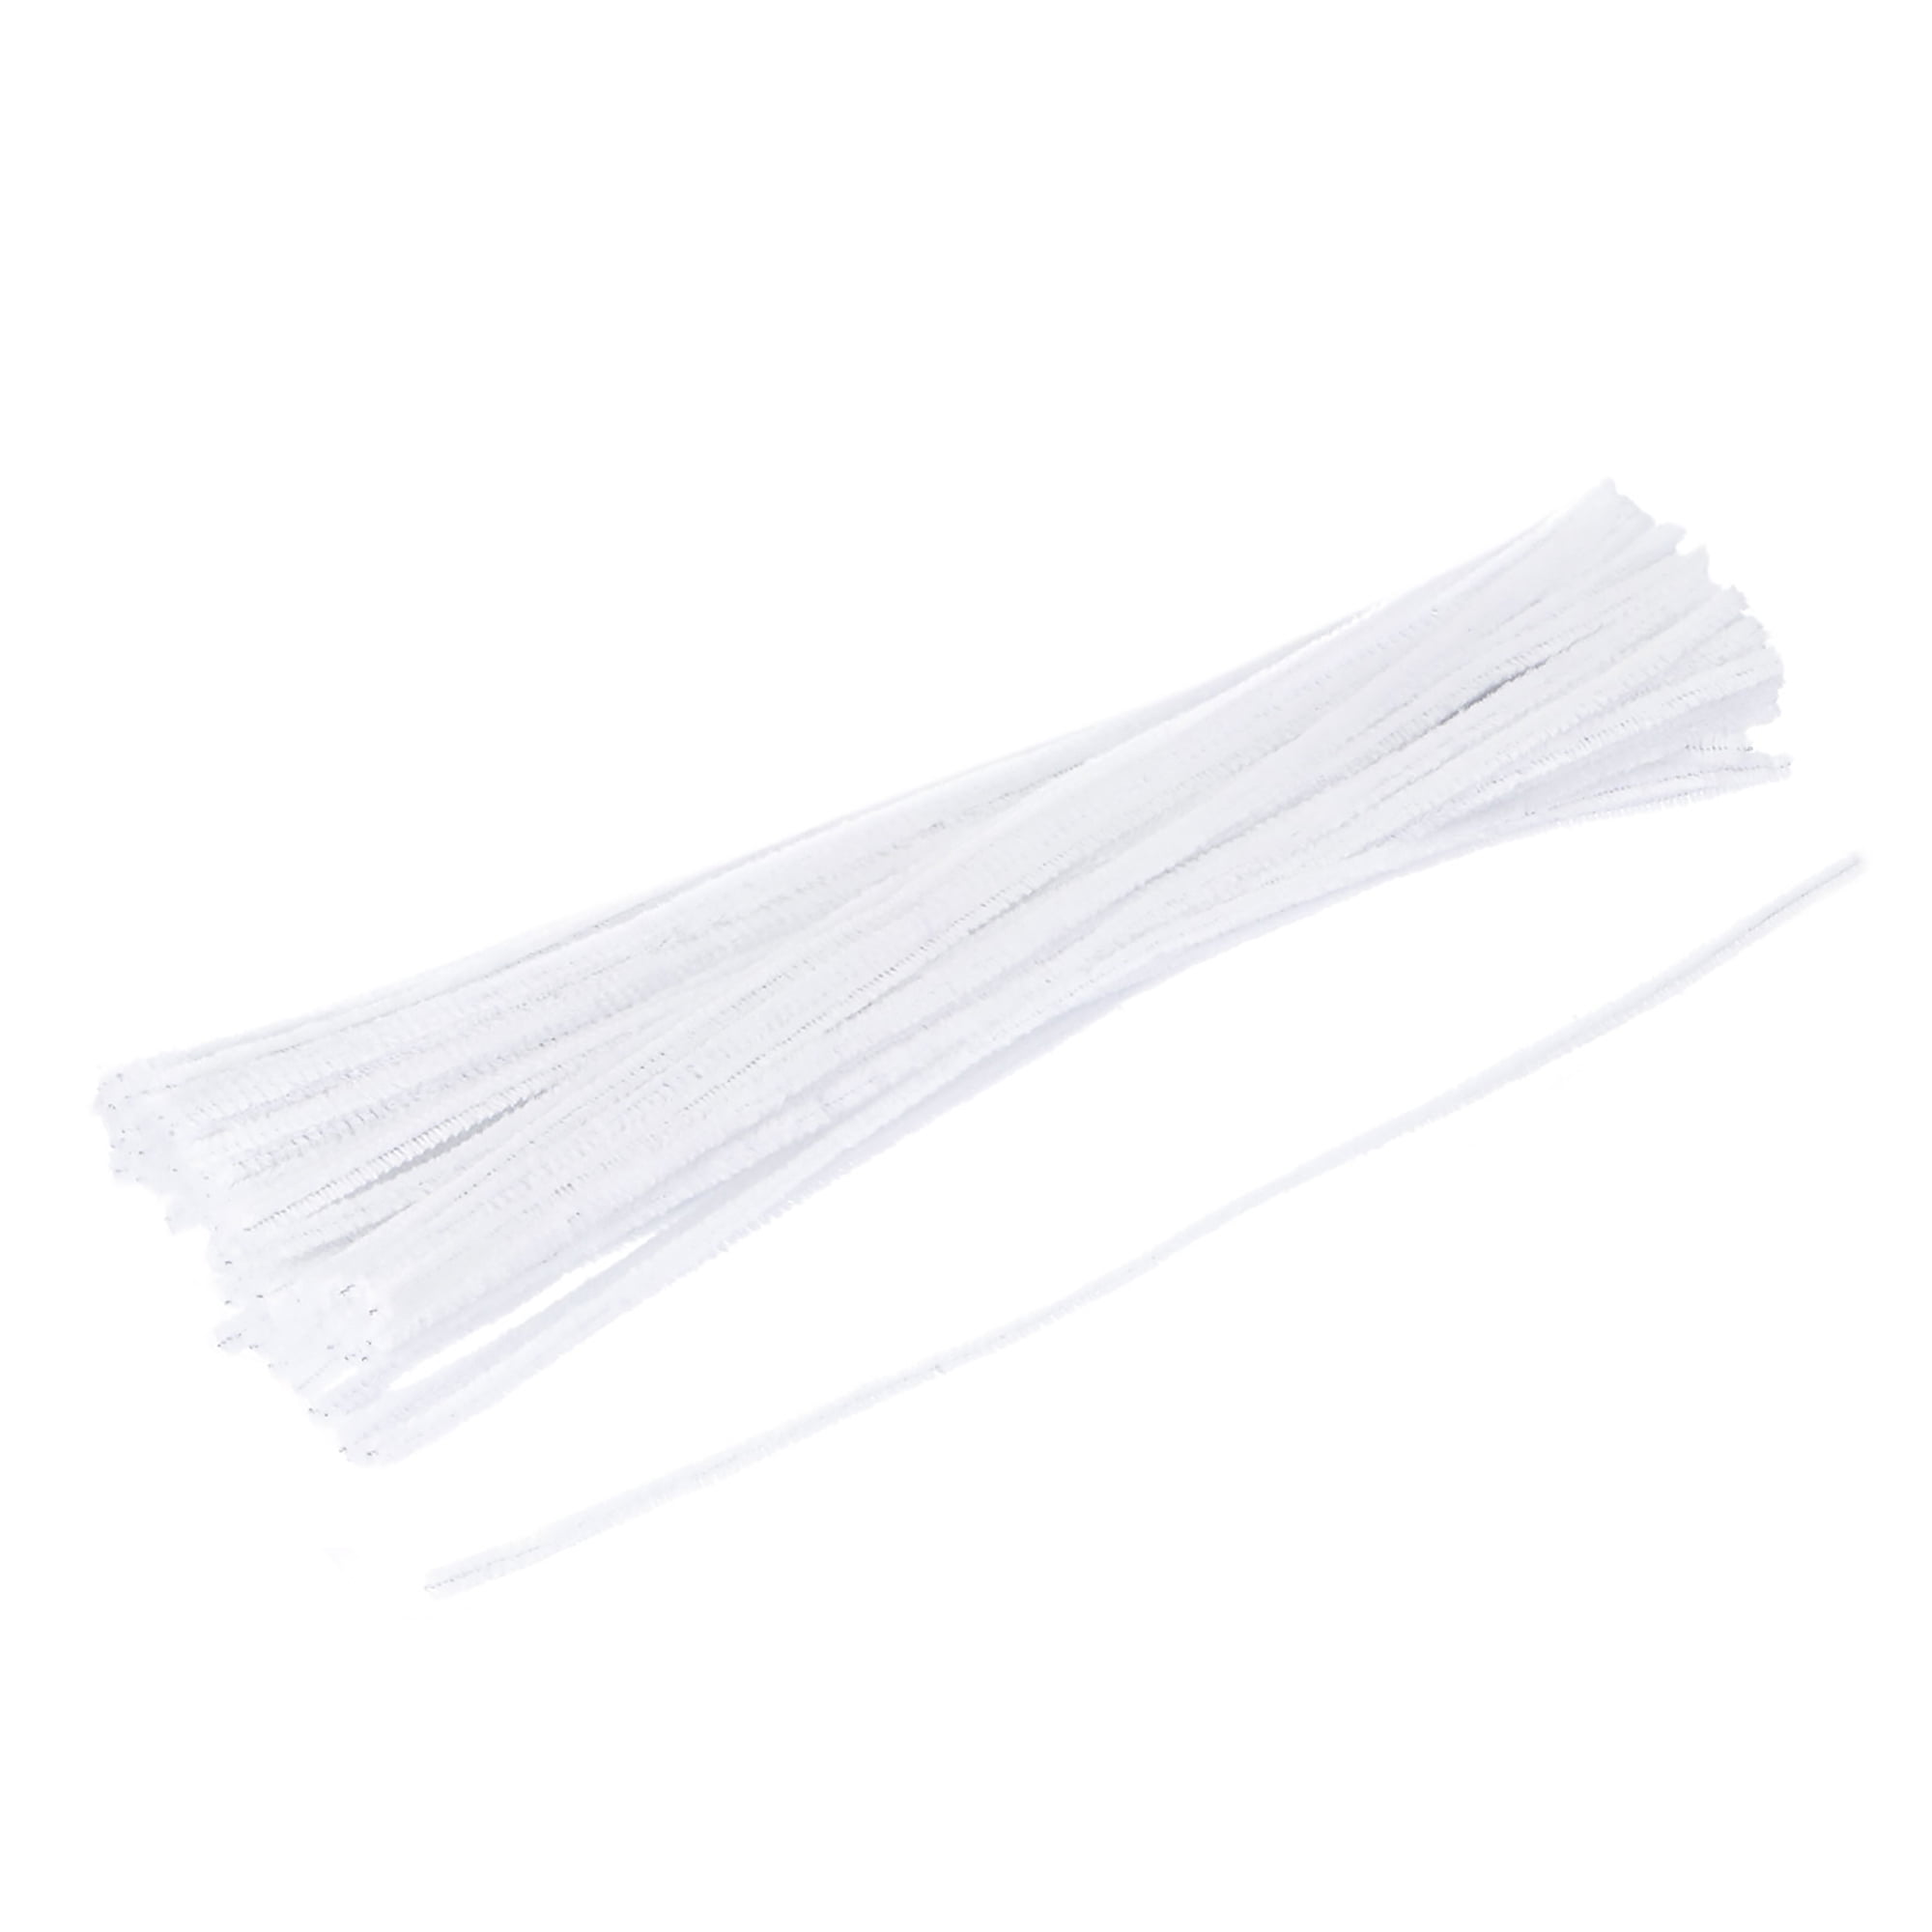 10-1000 Pack, WHITE Chenille Craft Stems Pipe Cleaners 30cm 12